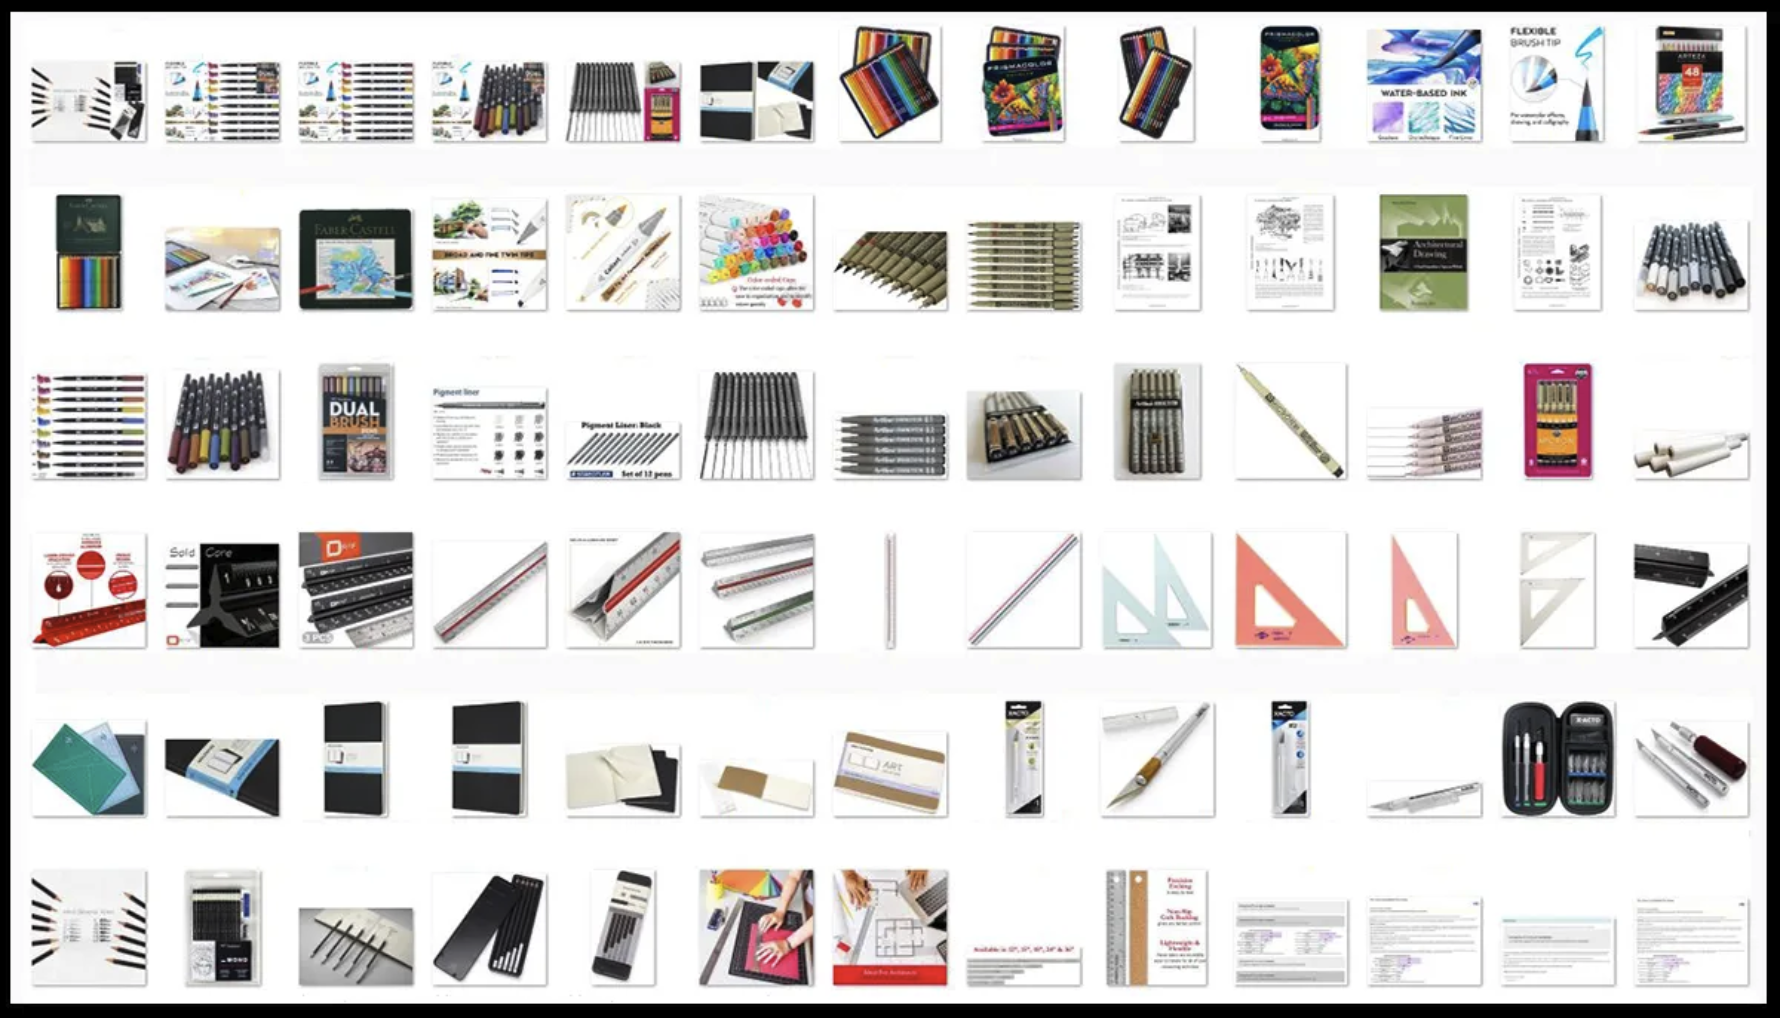 https://www.bdcnetwork.com/sites/default/files/Architecture%20school%20101%20-%20The%20must-have%20supplies%20for%20first-year%20architecture%20students.png